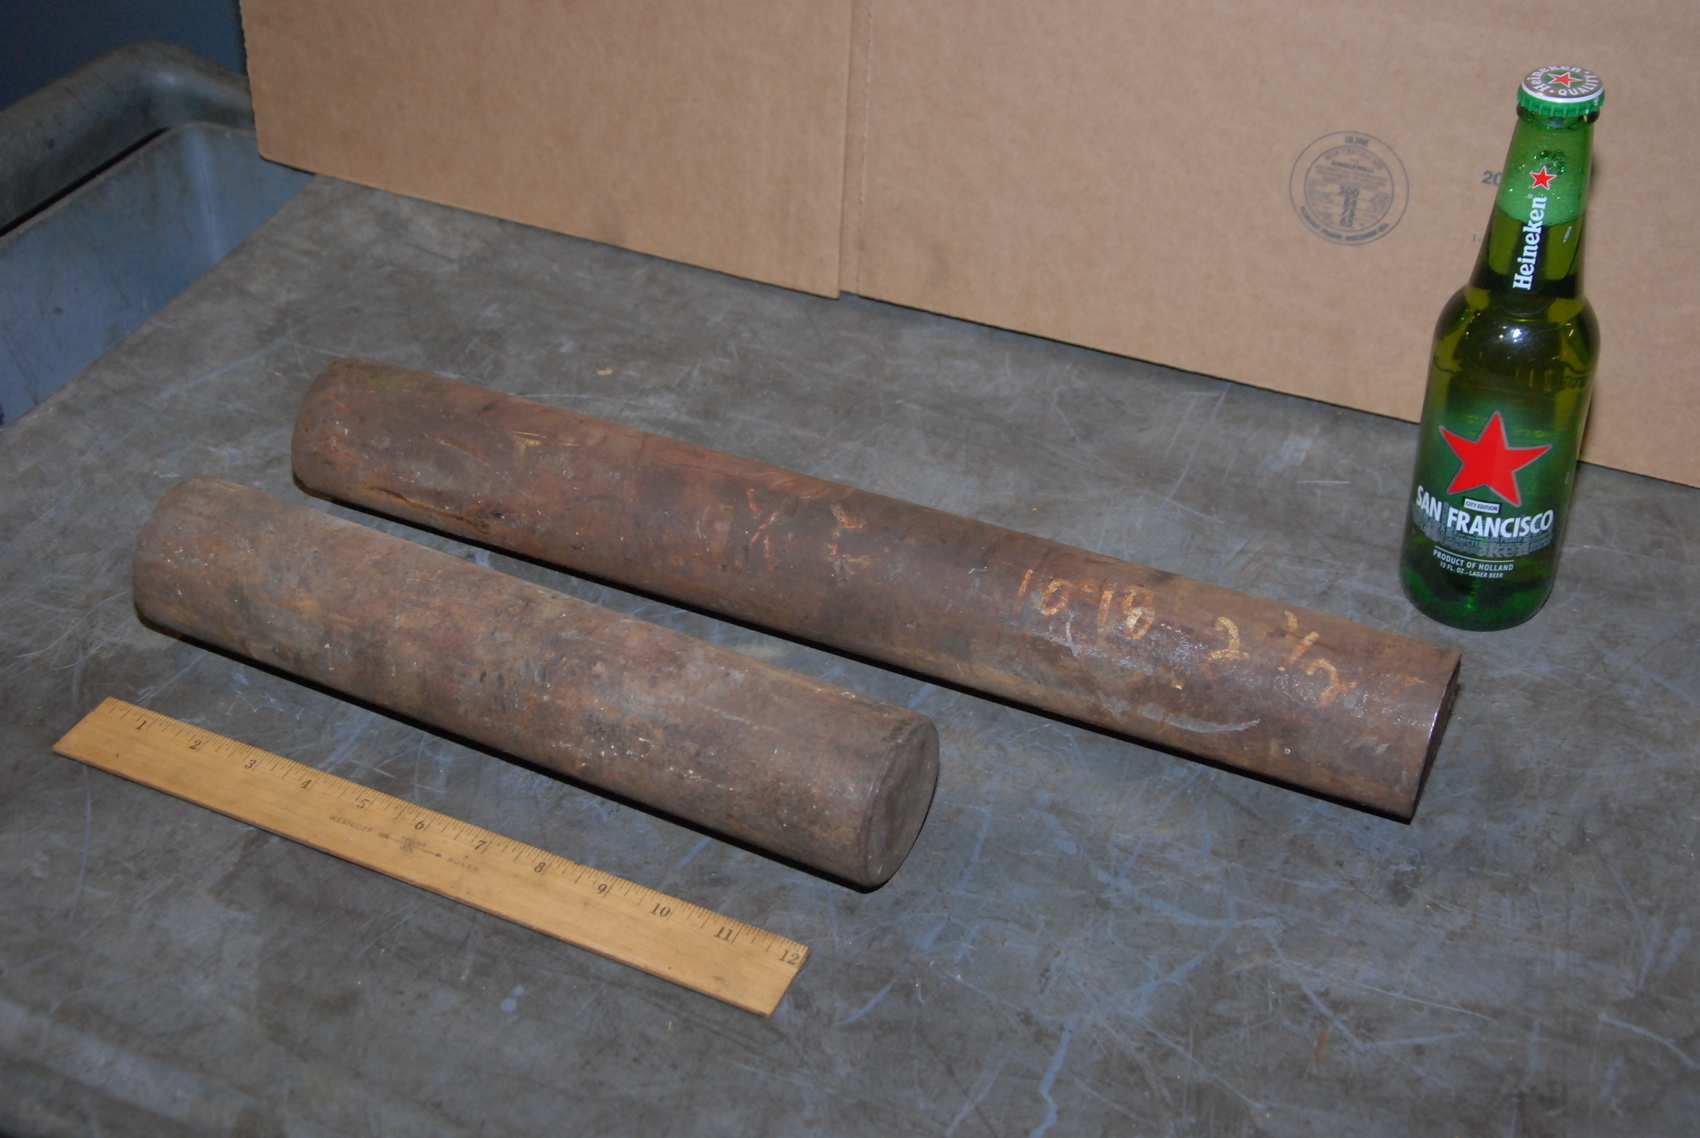 Lot of 2 Round Steel Bars For Press Blacksmith Anvil;45 lbs.